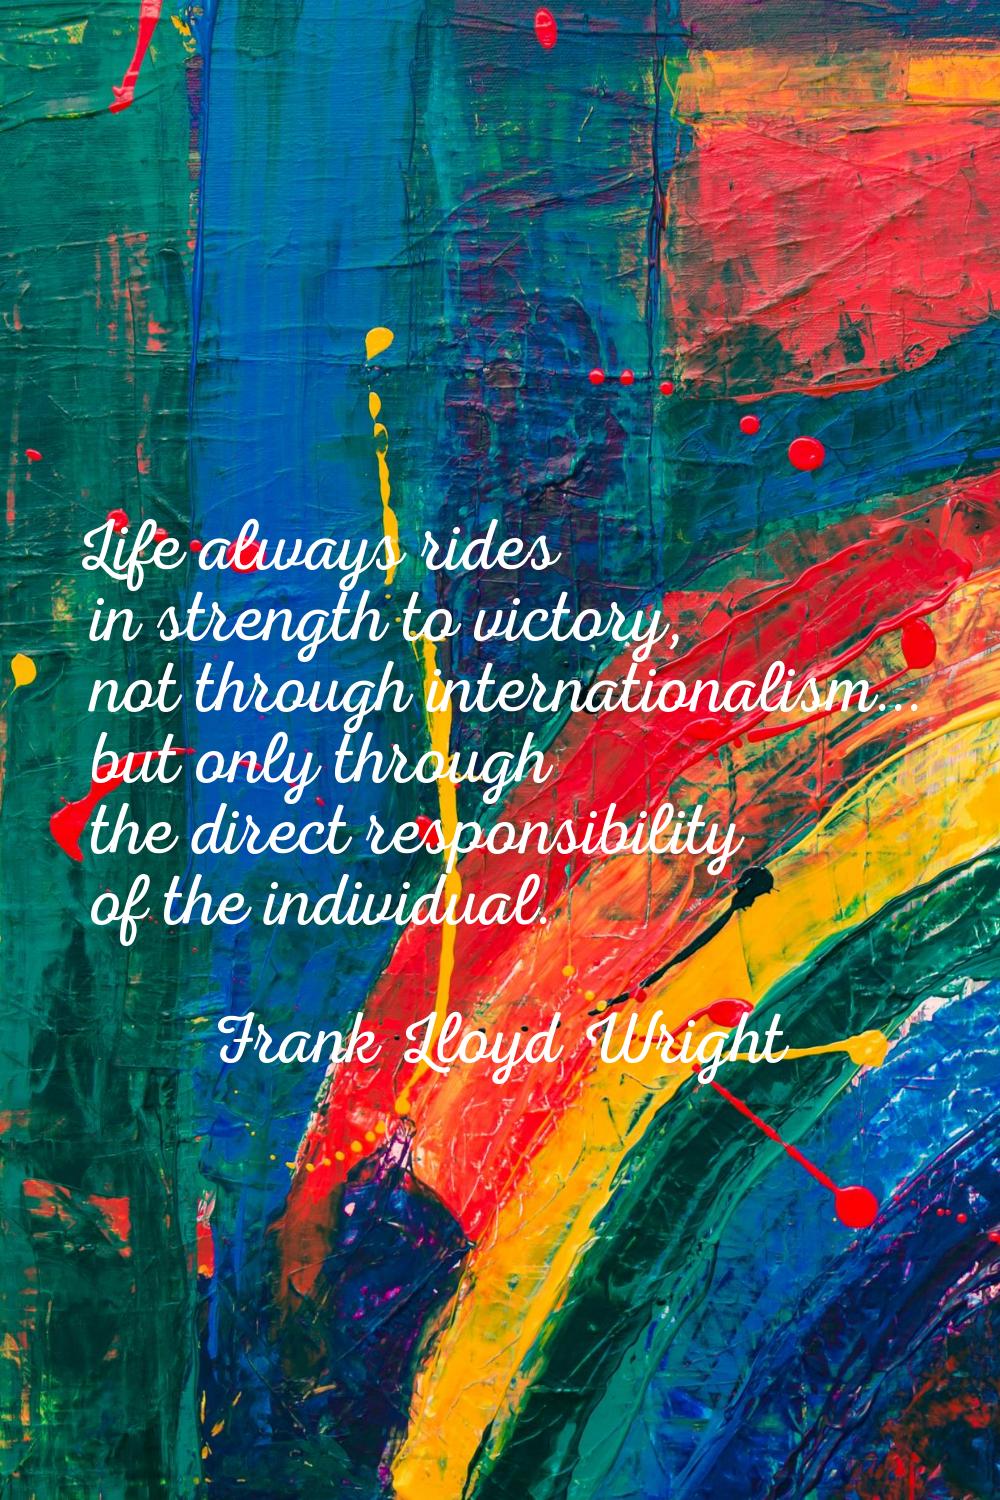 Life always rides in strength to victory, not through internationalism... but only through the dire